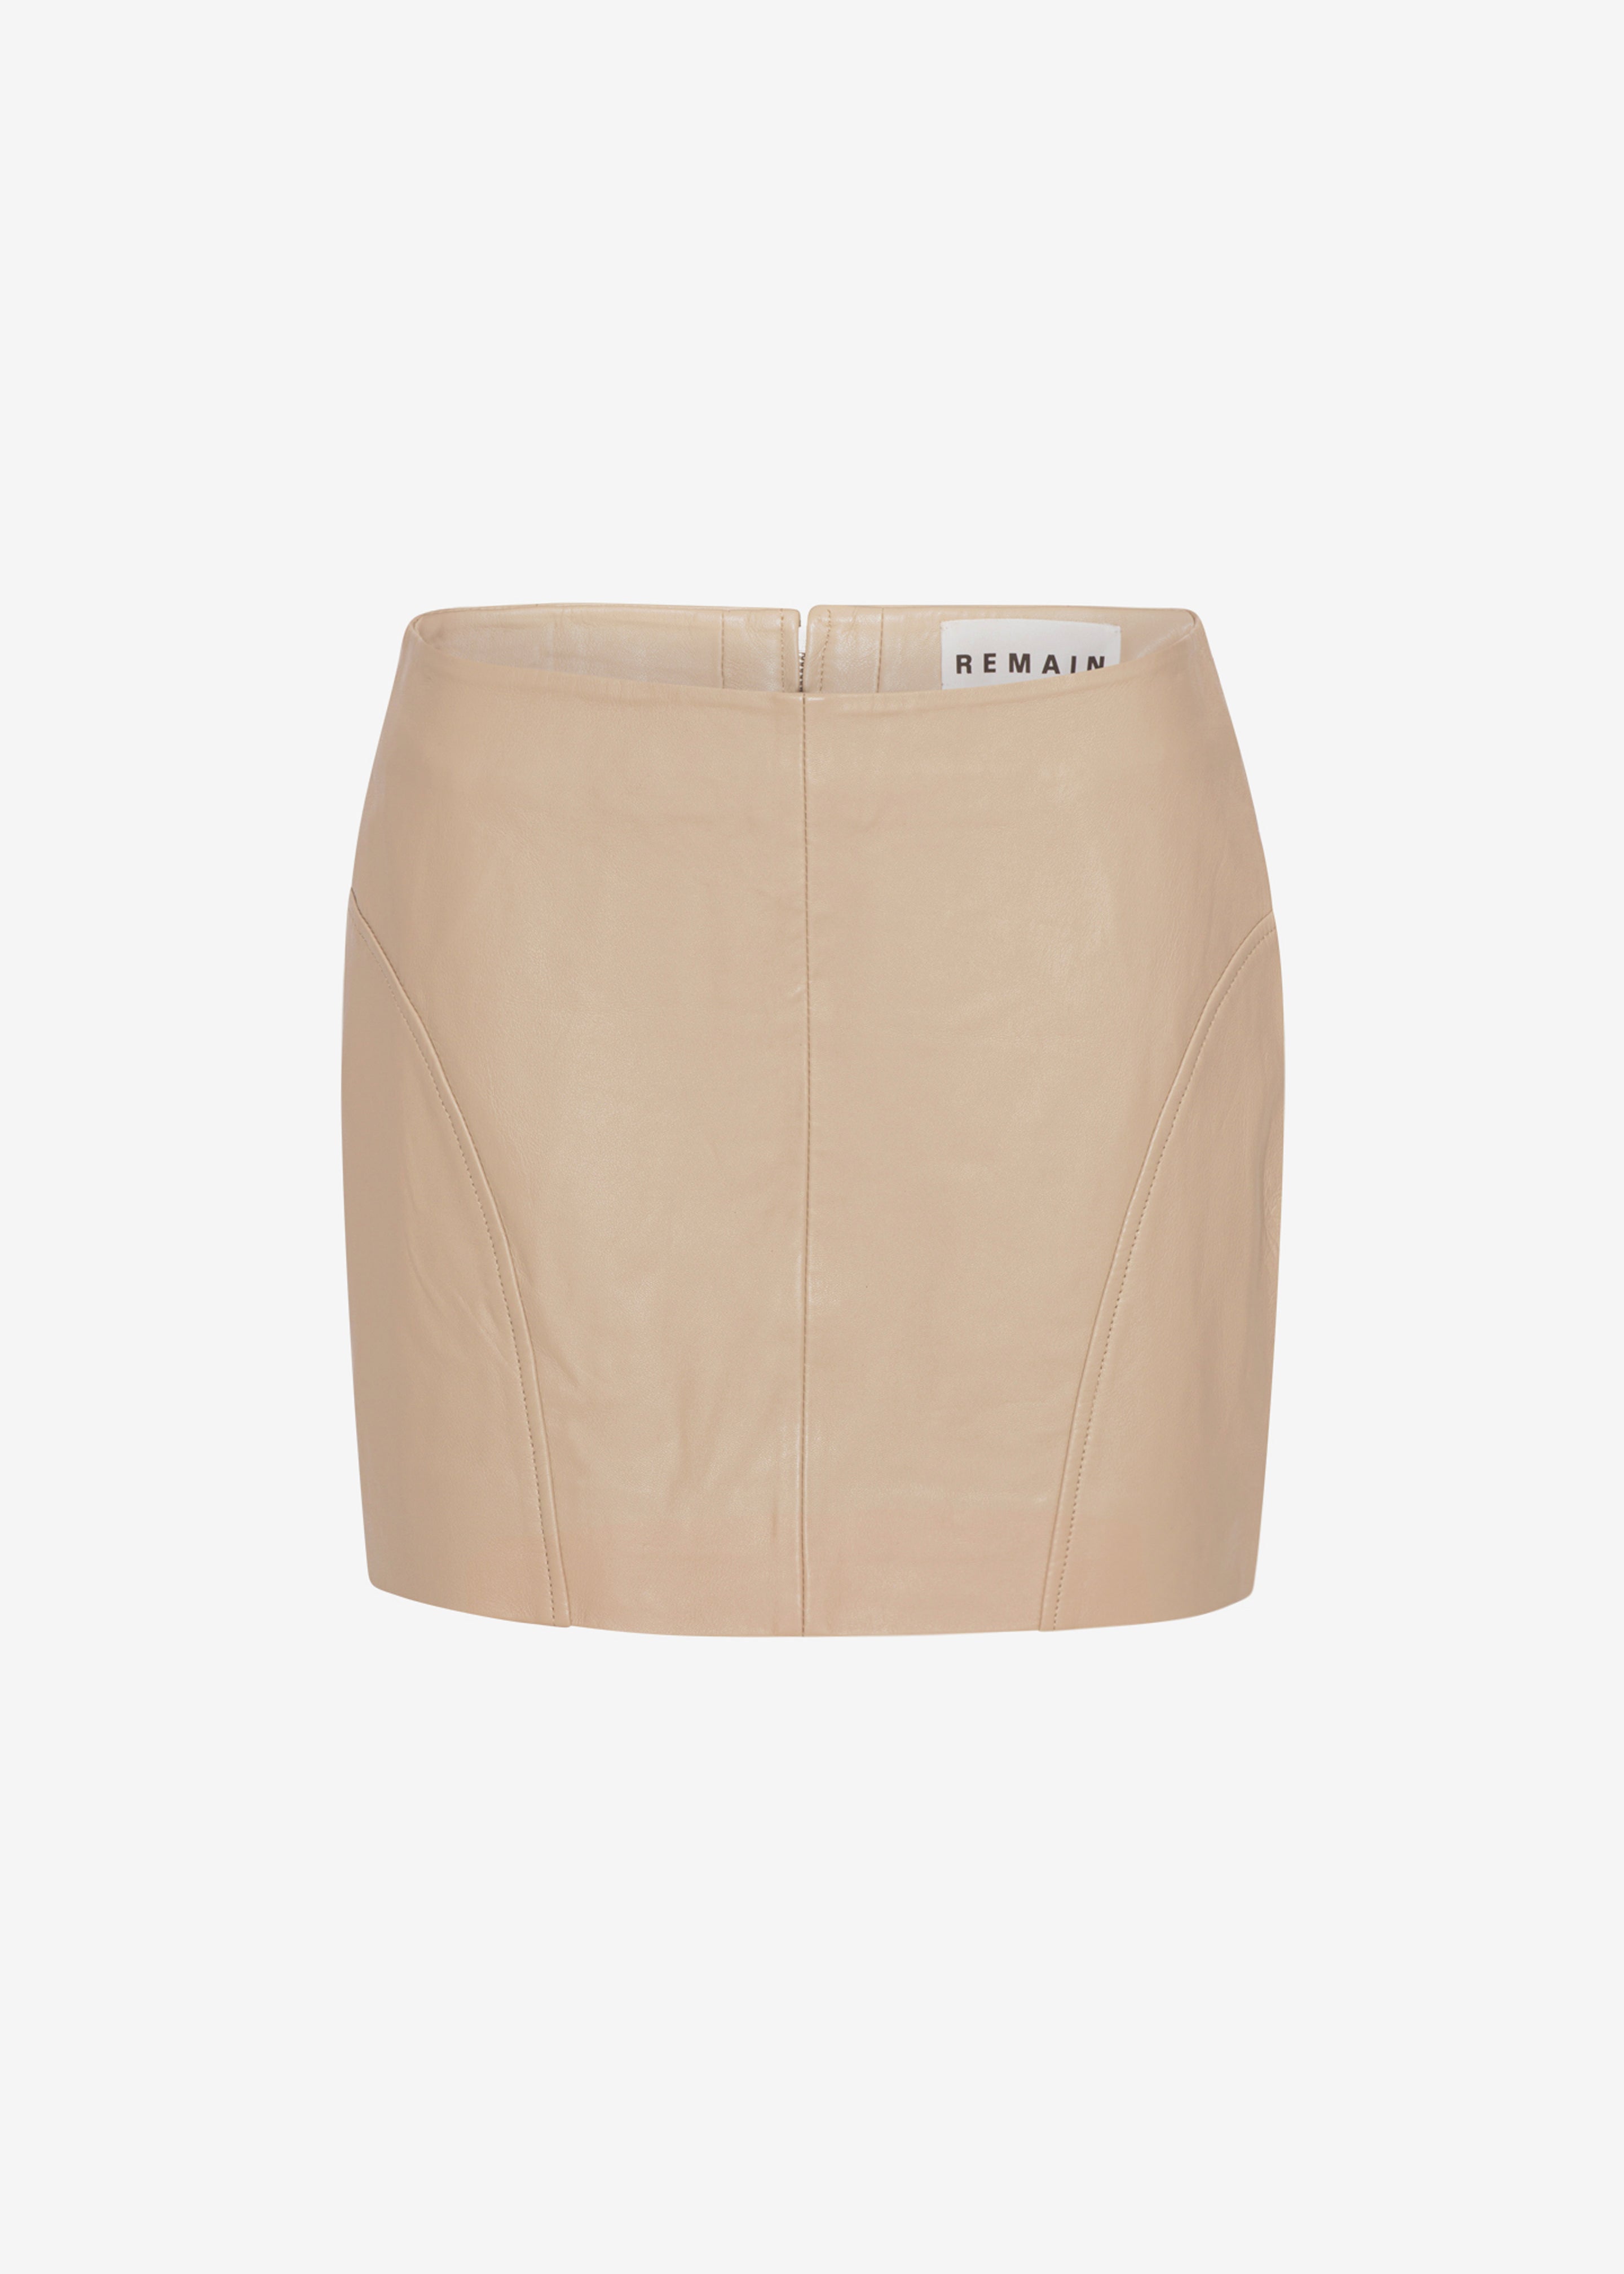 REMAIN Leather Mini Skirt - Incense Beige - 5